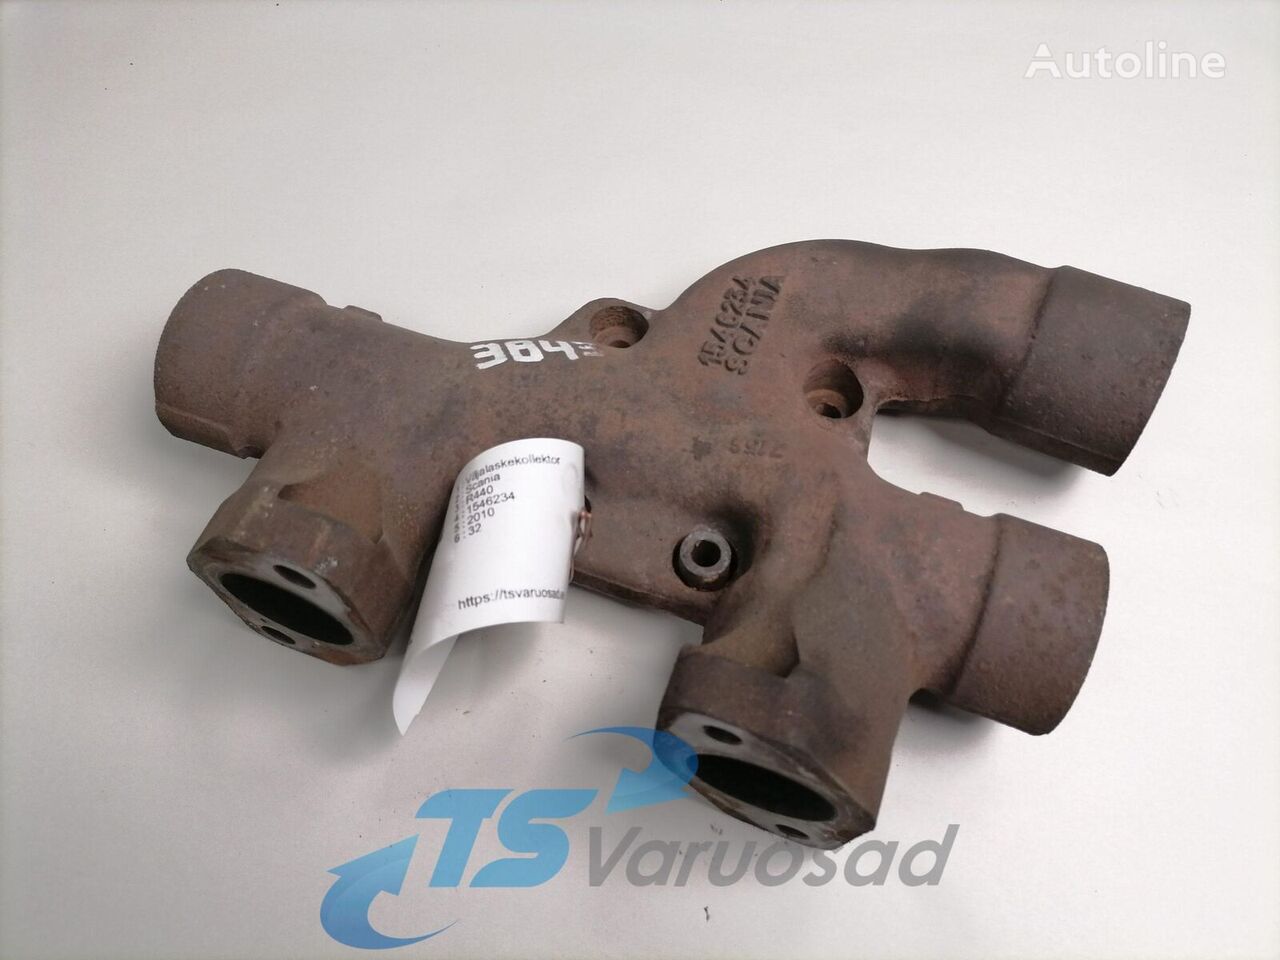 Scania Exhaust mainfold 2243134 manifold for Scania R440 truck tractor